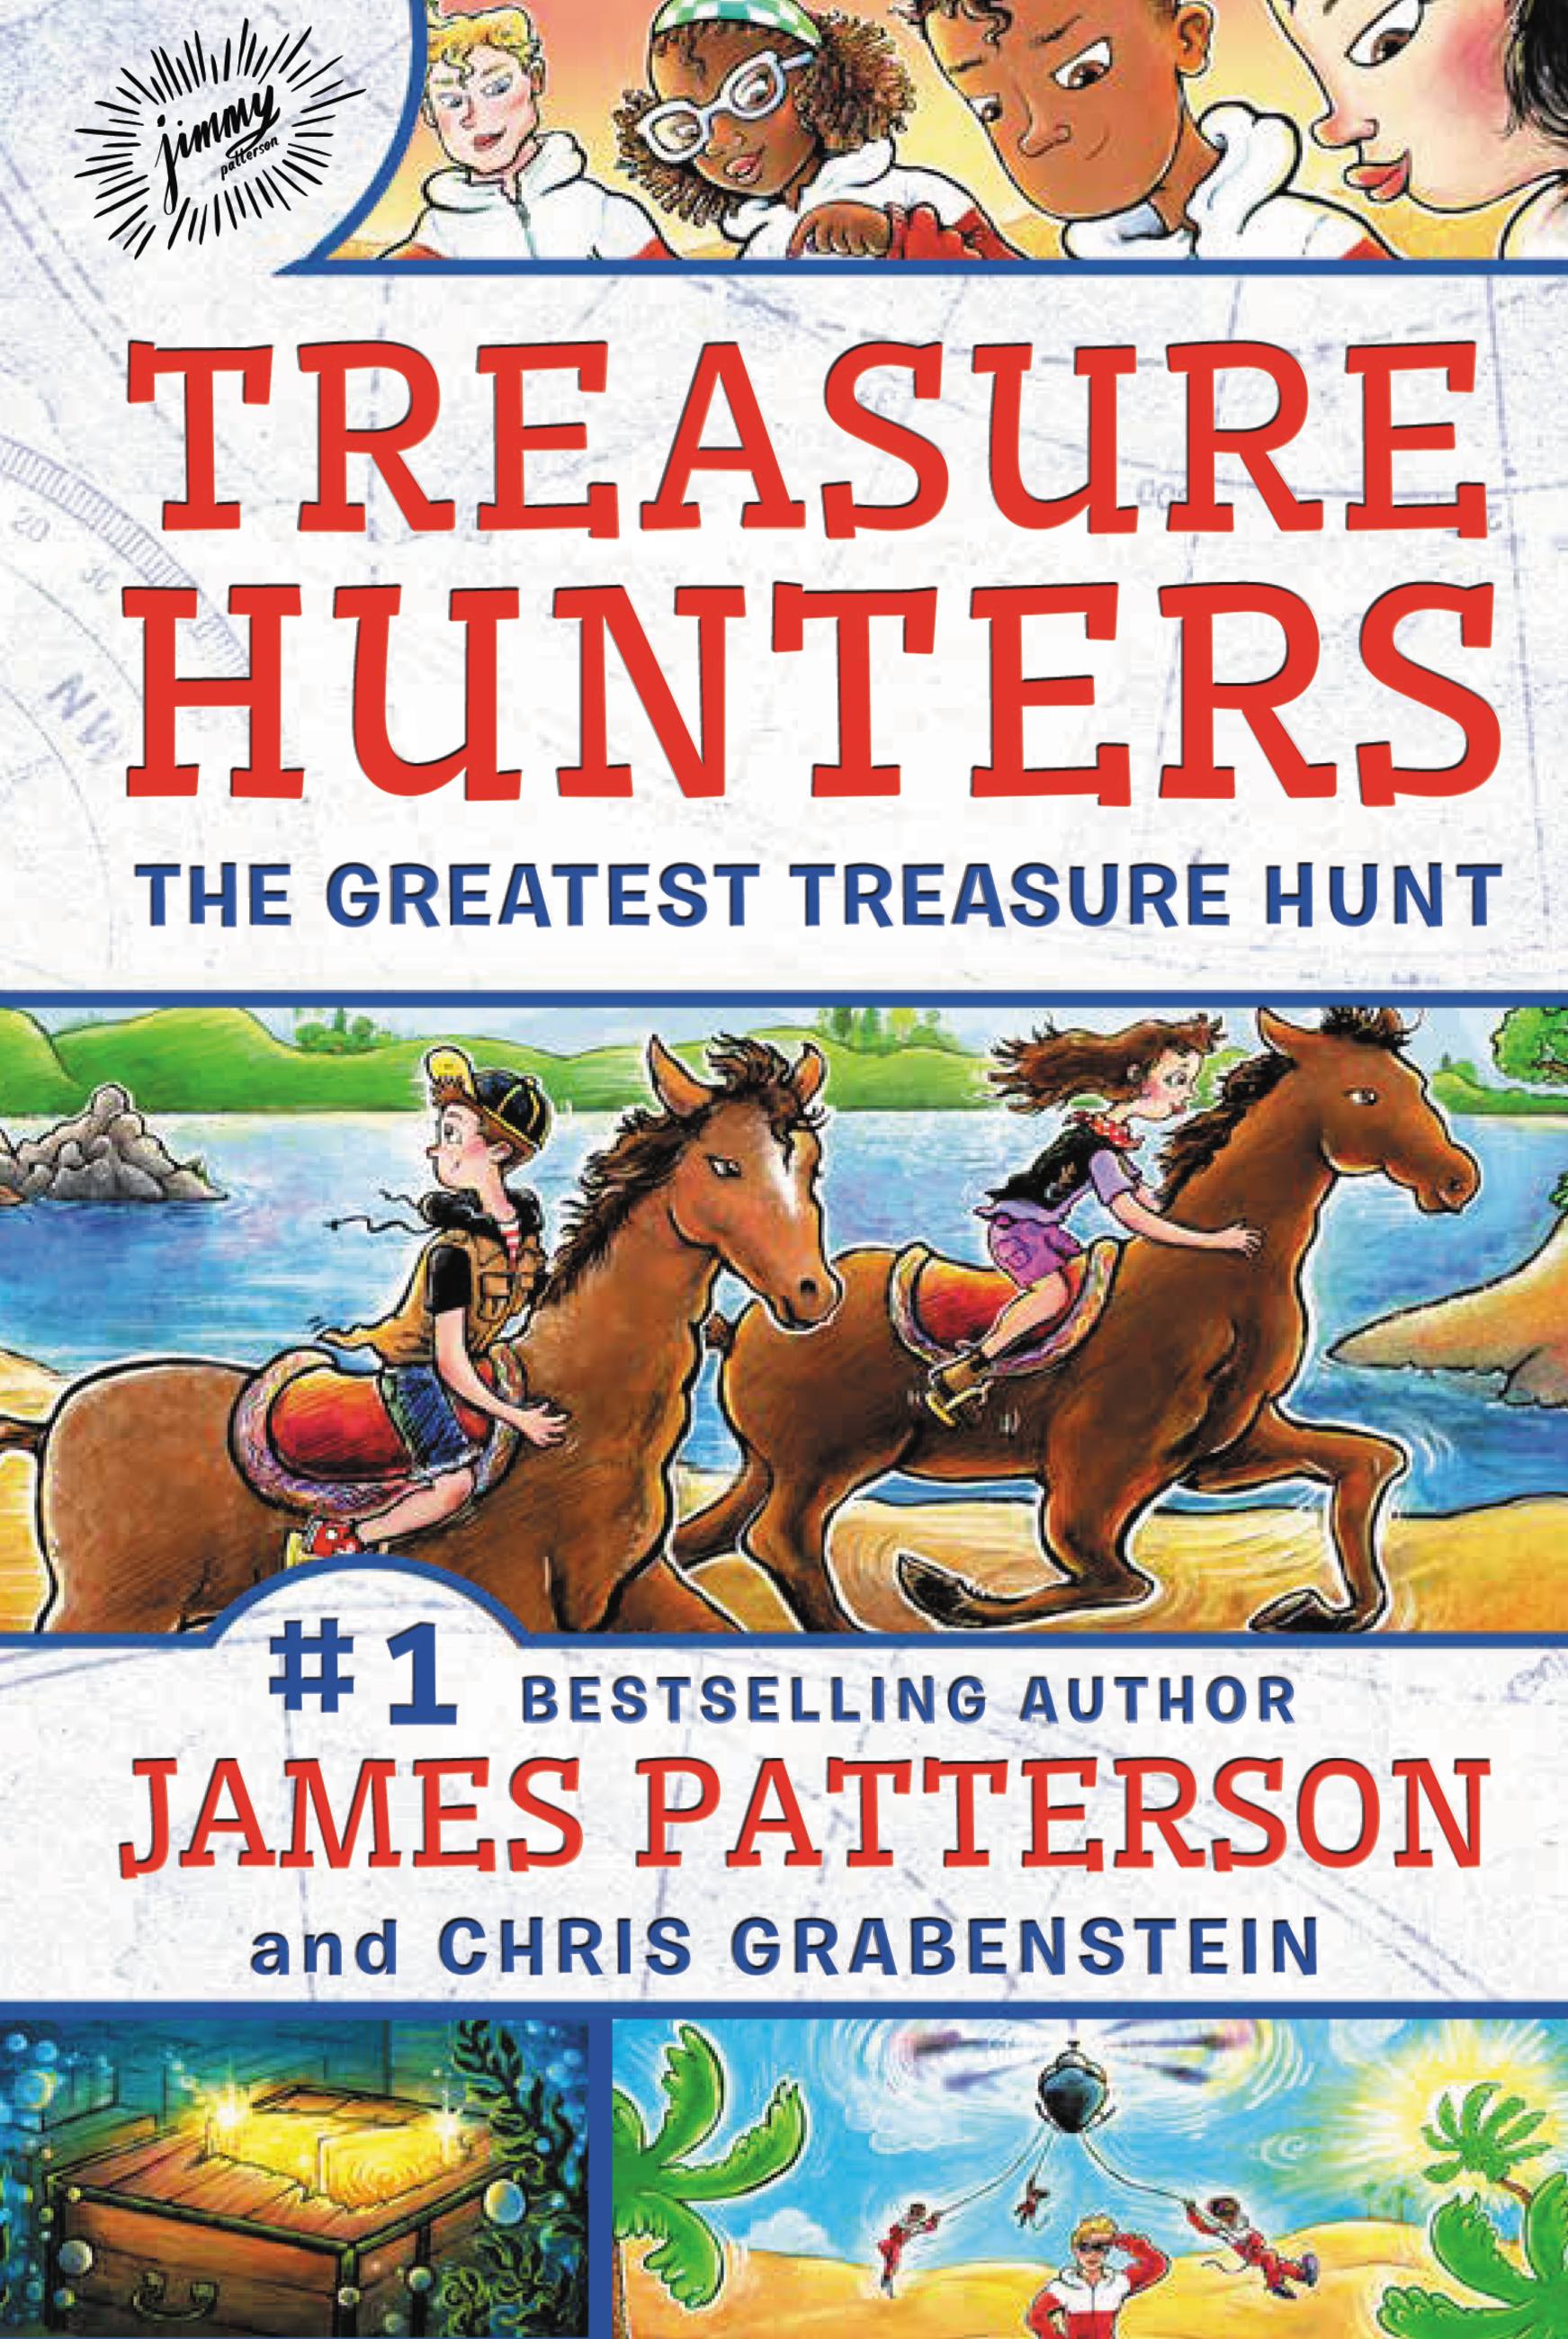 James Patterson's Books for Kids